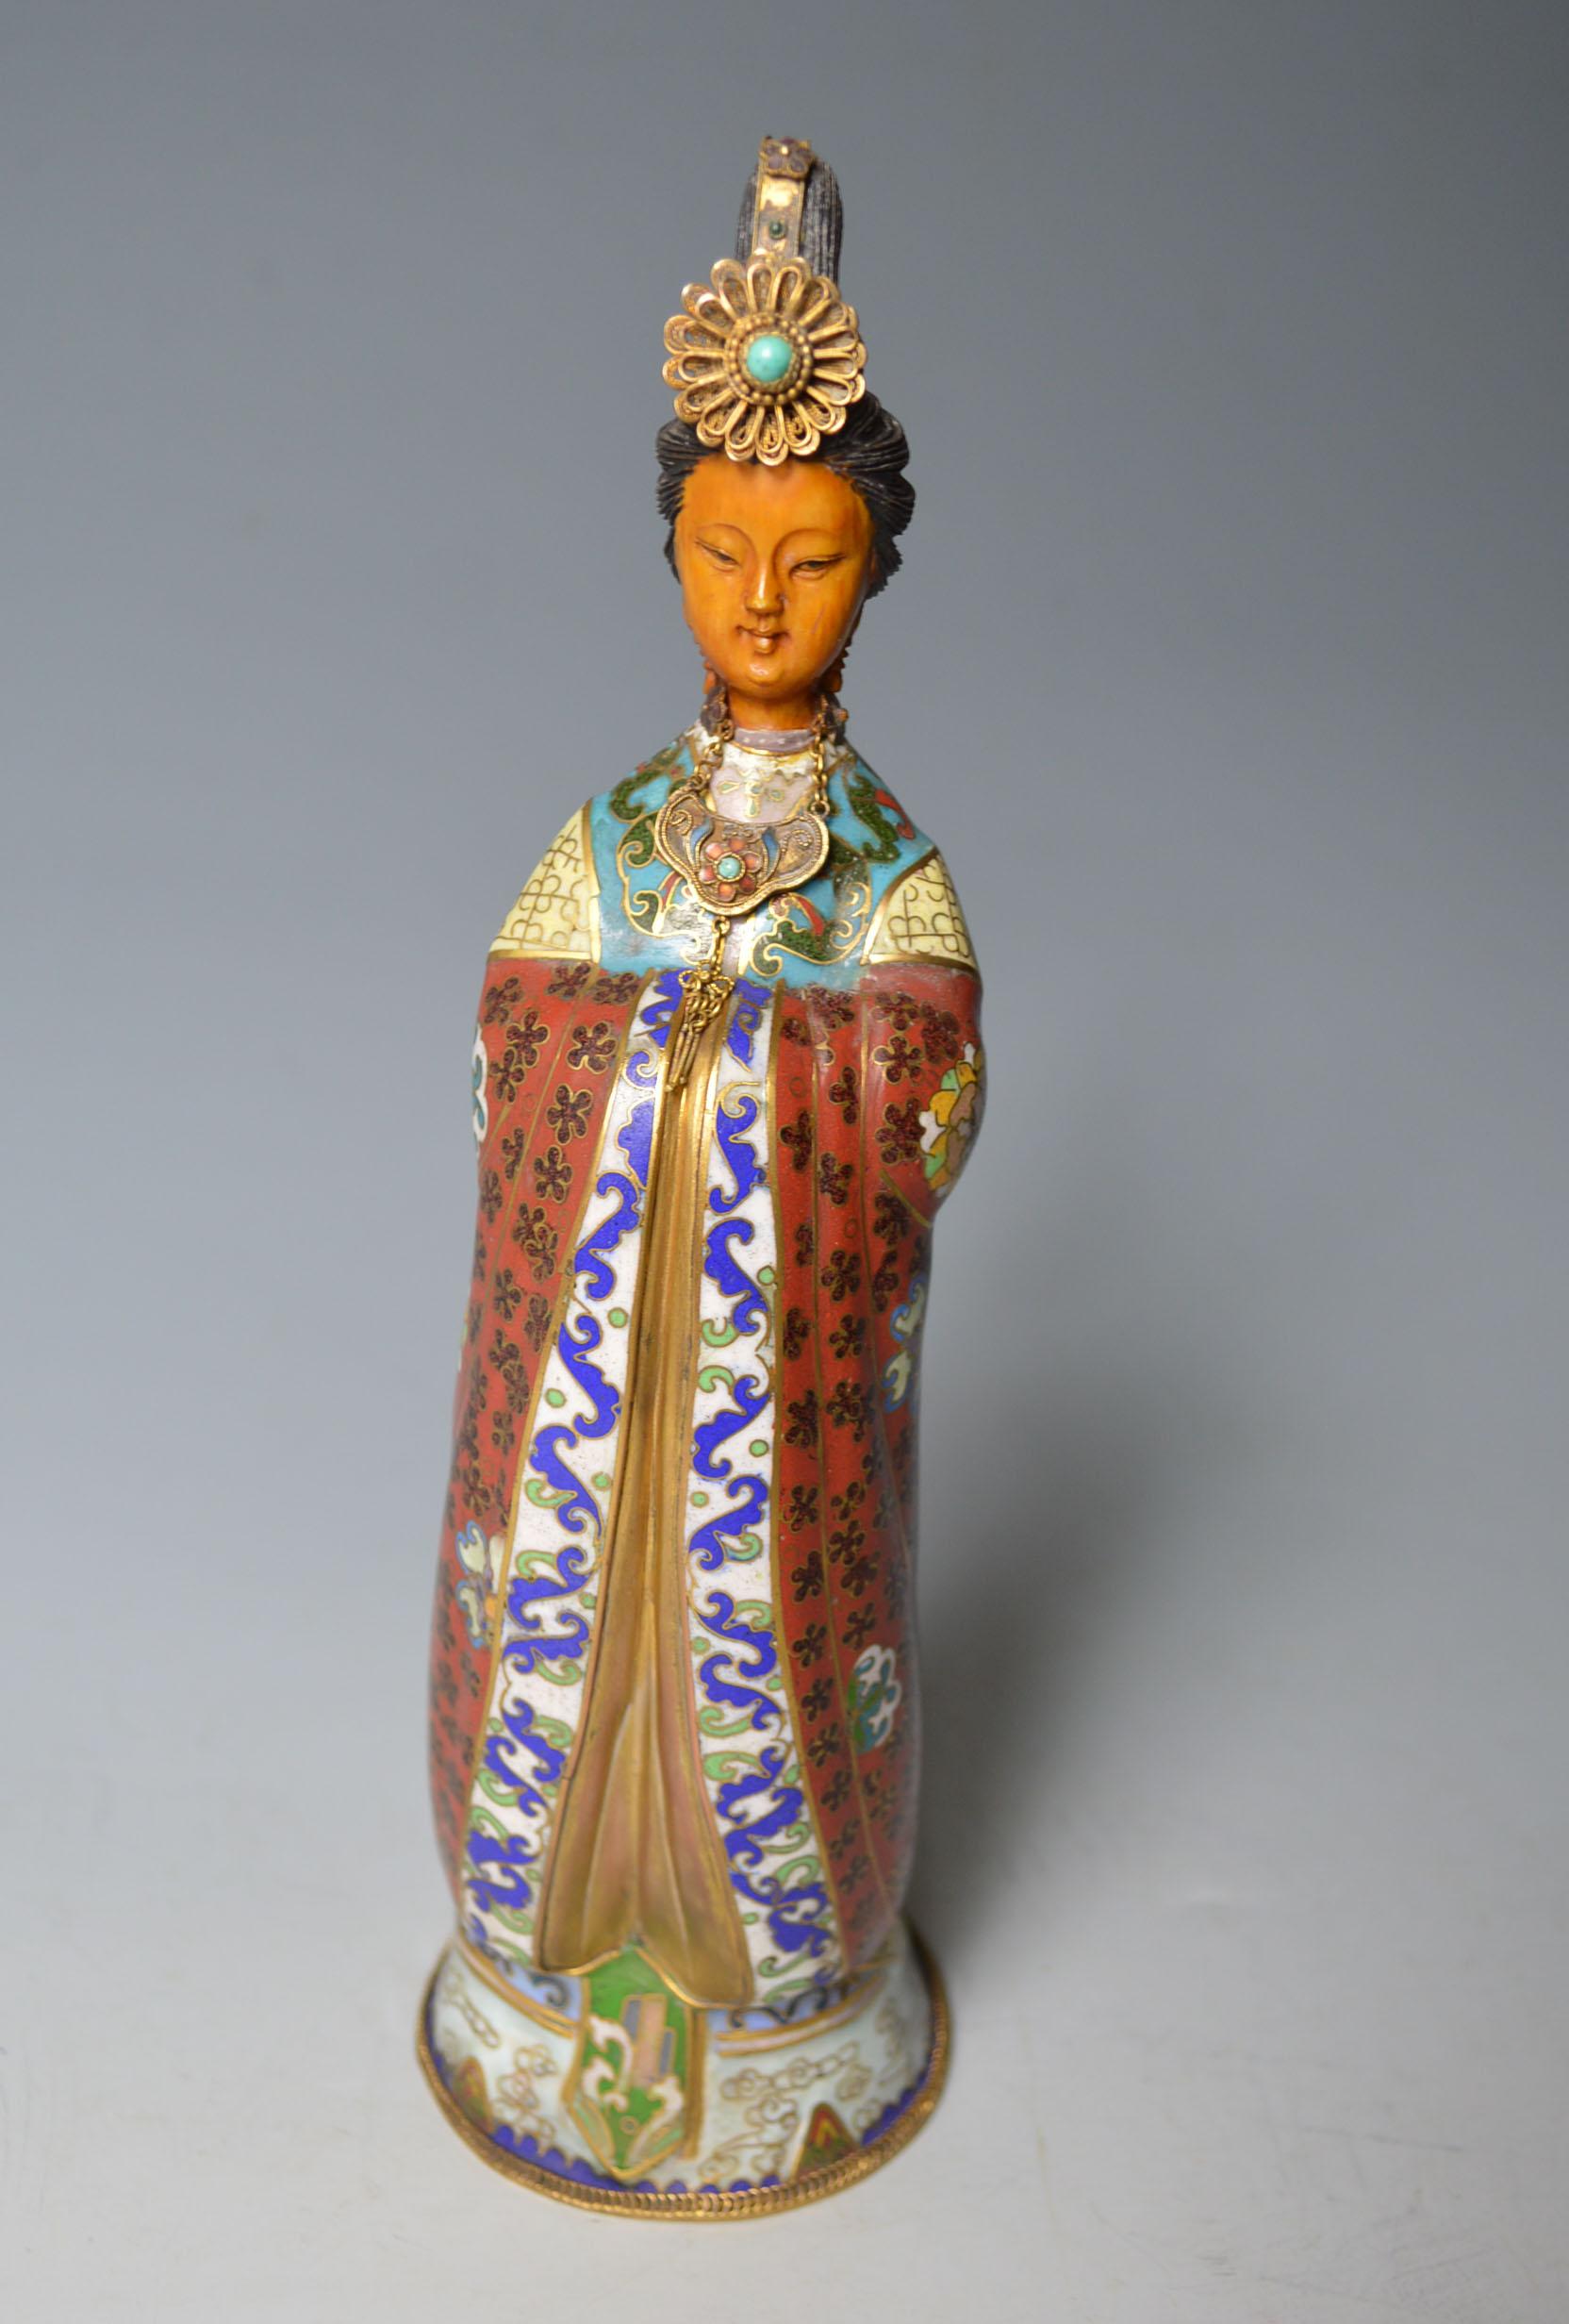 A fine Chinese Cloisonne figure
A superb finely made Chinese Cloisonne figure of a noble lady or princess standing in long sumptuously decorated robes
wearing a diadem and necklace
Period 1920s-1930s
Condition: Fine
Measures: Height 10 inches ,